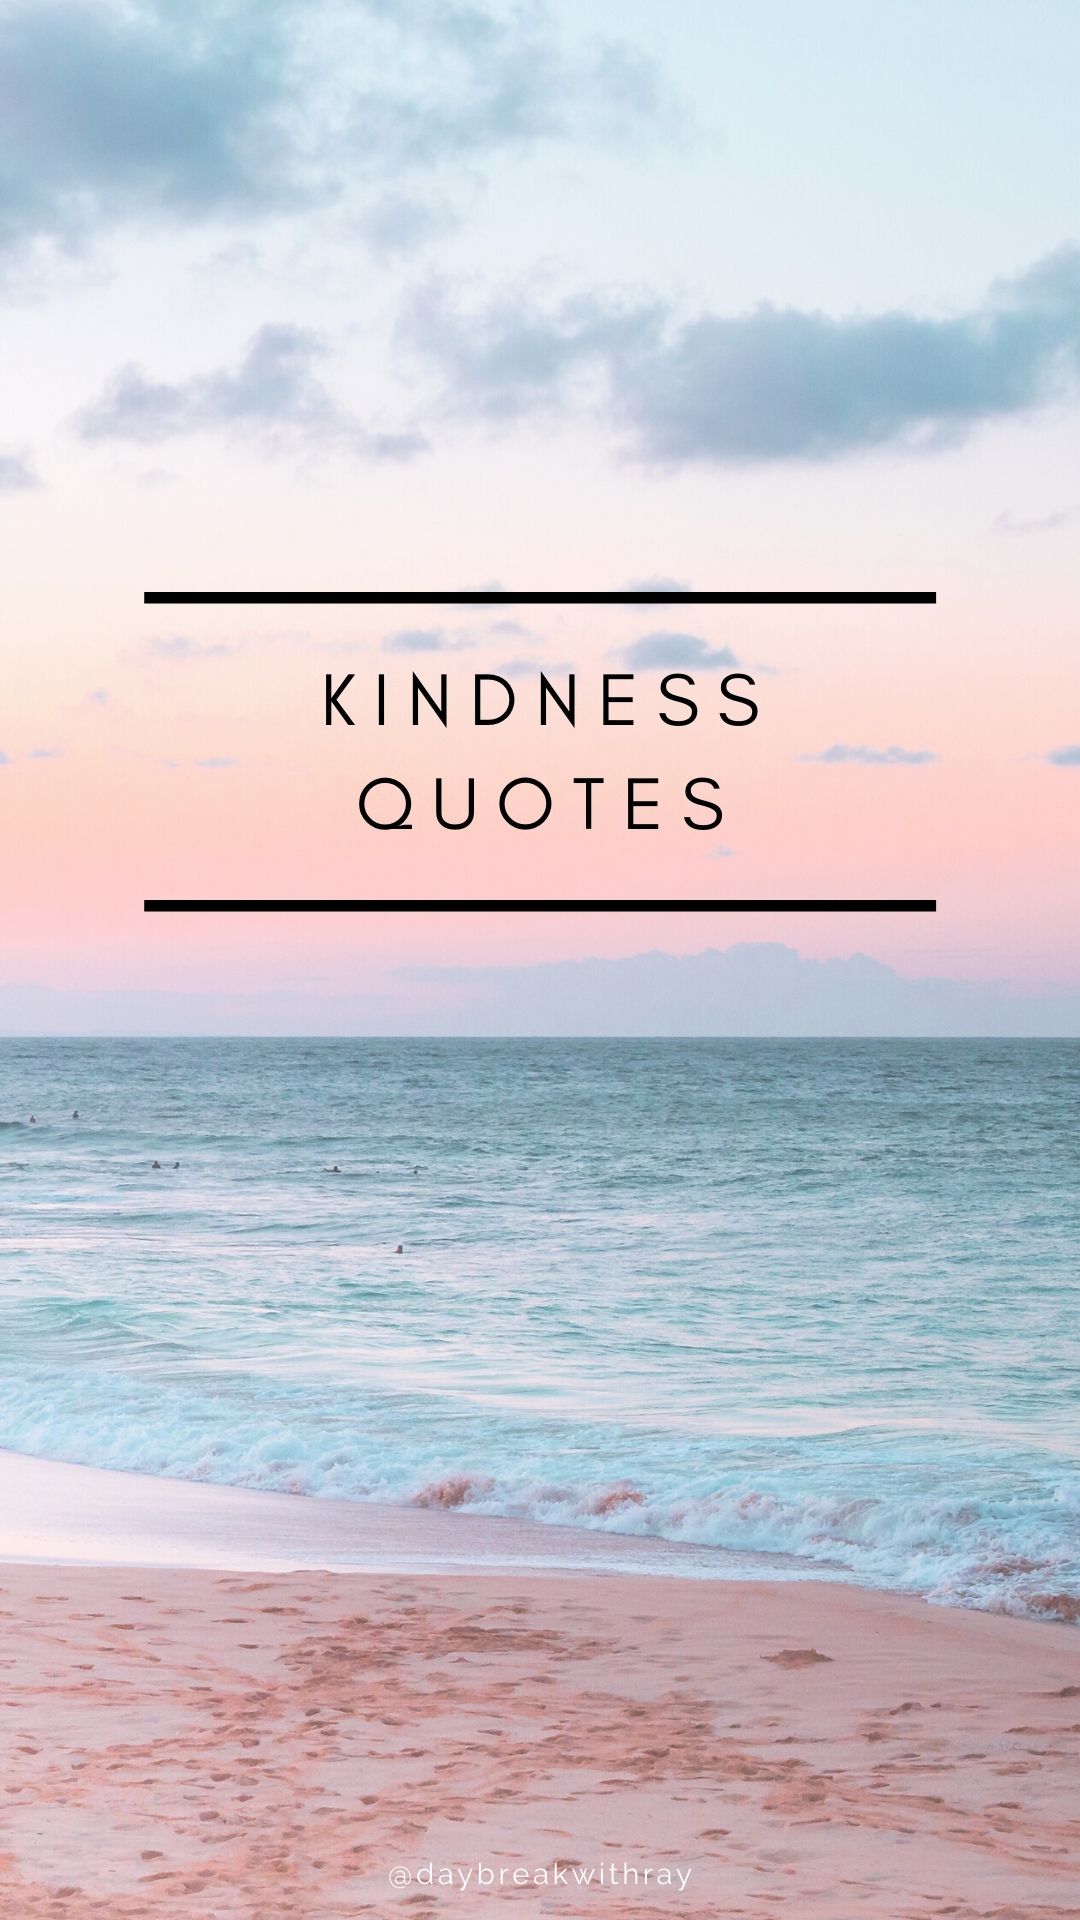 Kindness Quotes Cover @daybreakwithray